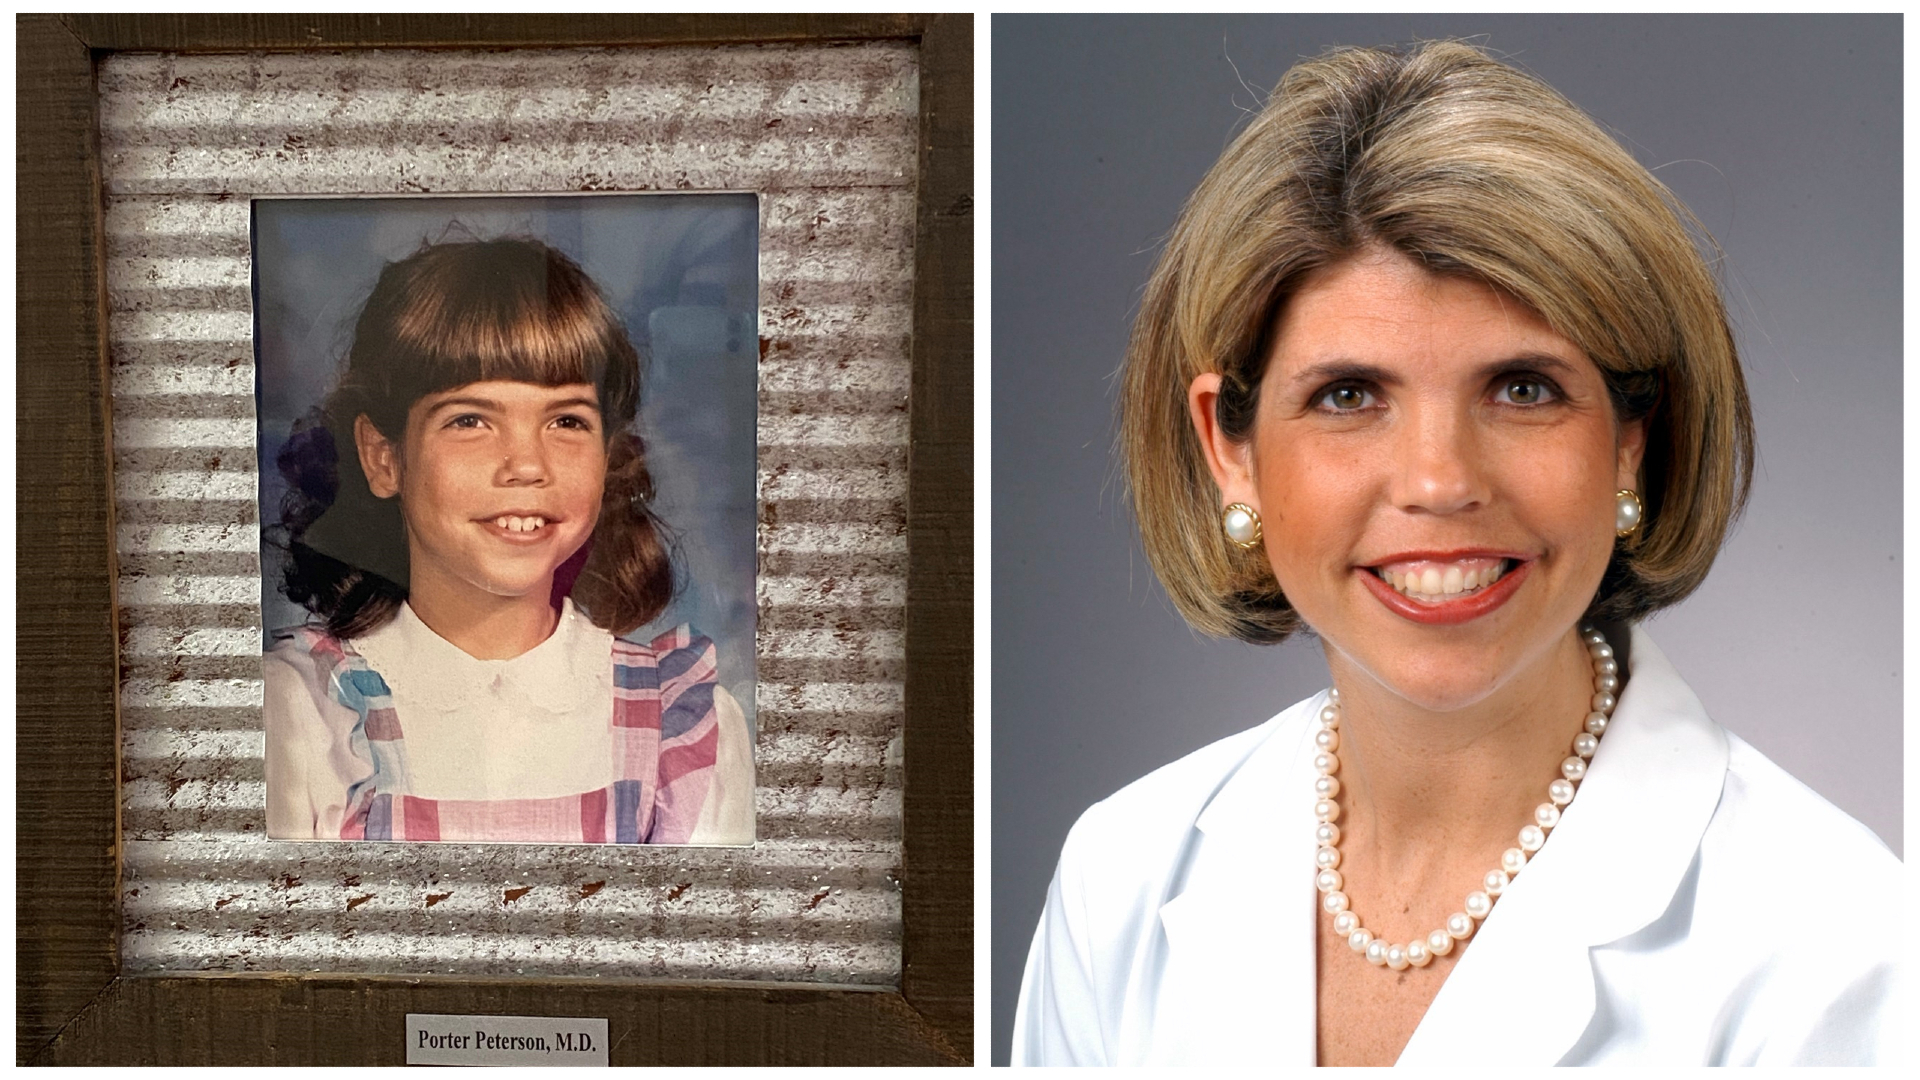 From patient to pediatrician, Dr. Porter Peterson shares her full circle story, including the moment she knew she wanted to end up at Atrium Health Levine Children’s Cabarrus Pediatrics.